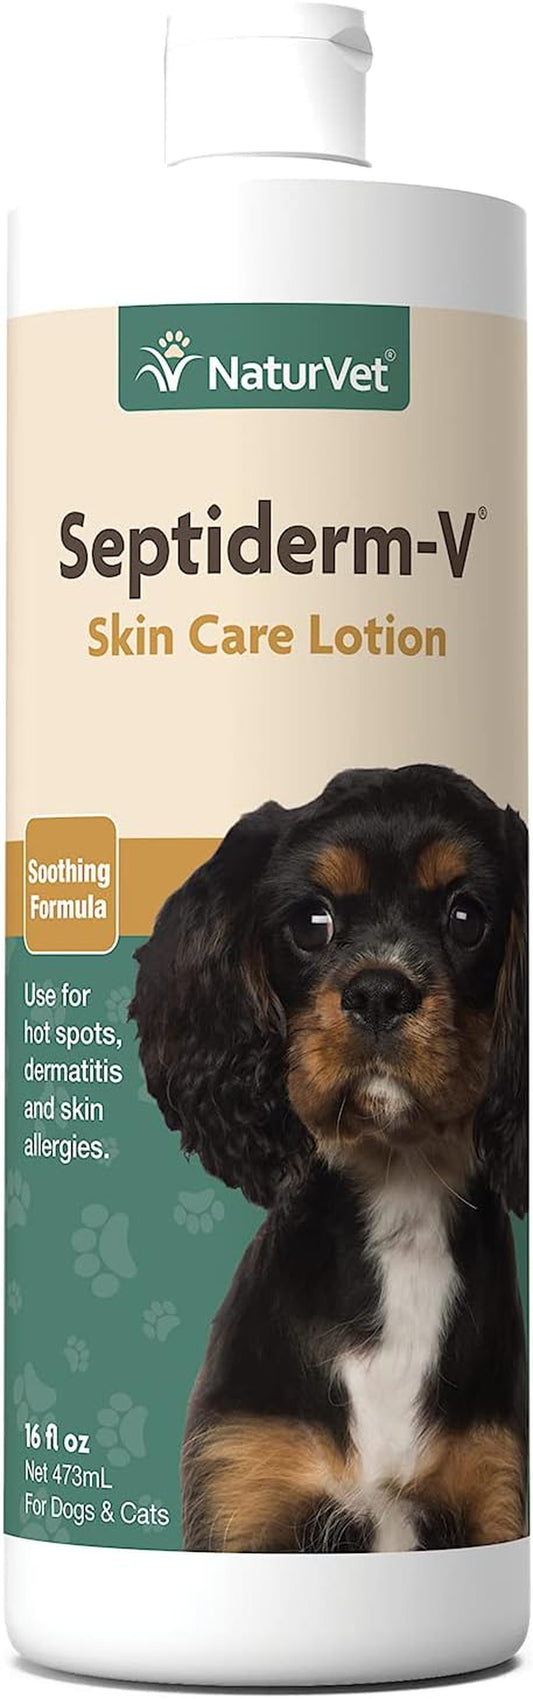 Naturvet Septiderm-V Skin Care Lotion for Dogs & Cats – Pet Health Supplement for Dermatitis, Dog Skin Allergies, Itching, Hot Spots, Cat Rashes – Pet Lotion, Grooming Aid – 16 Oz.